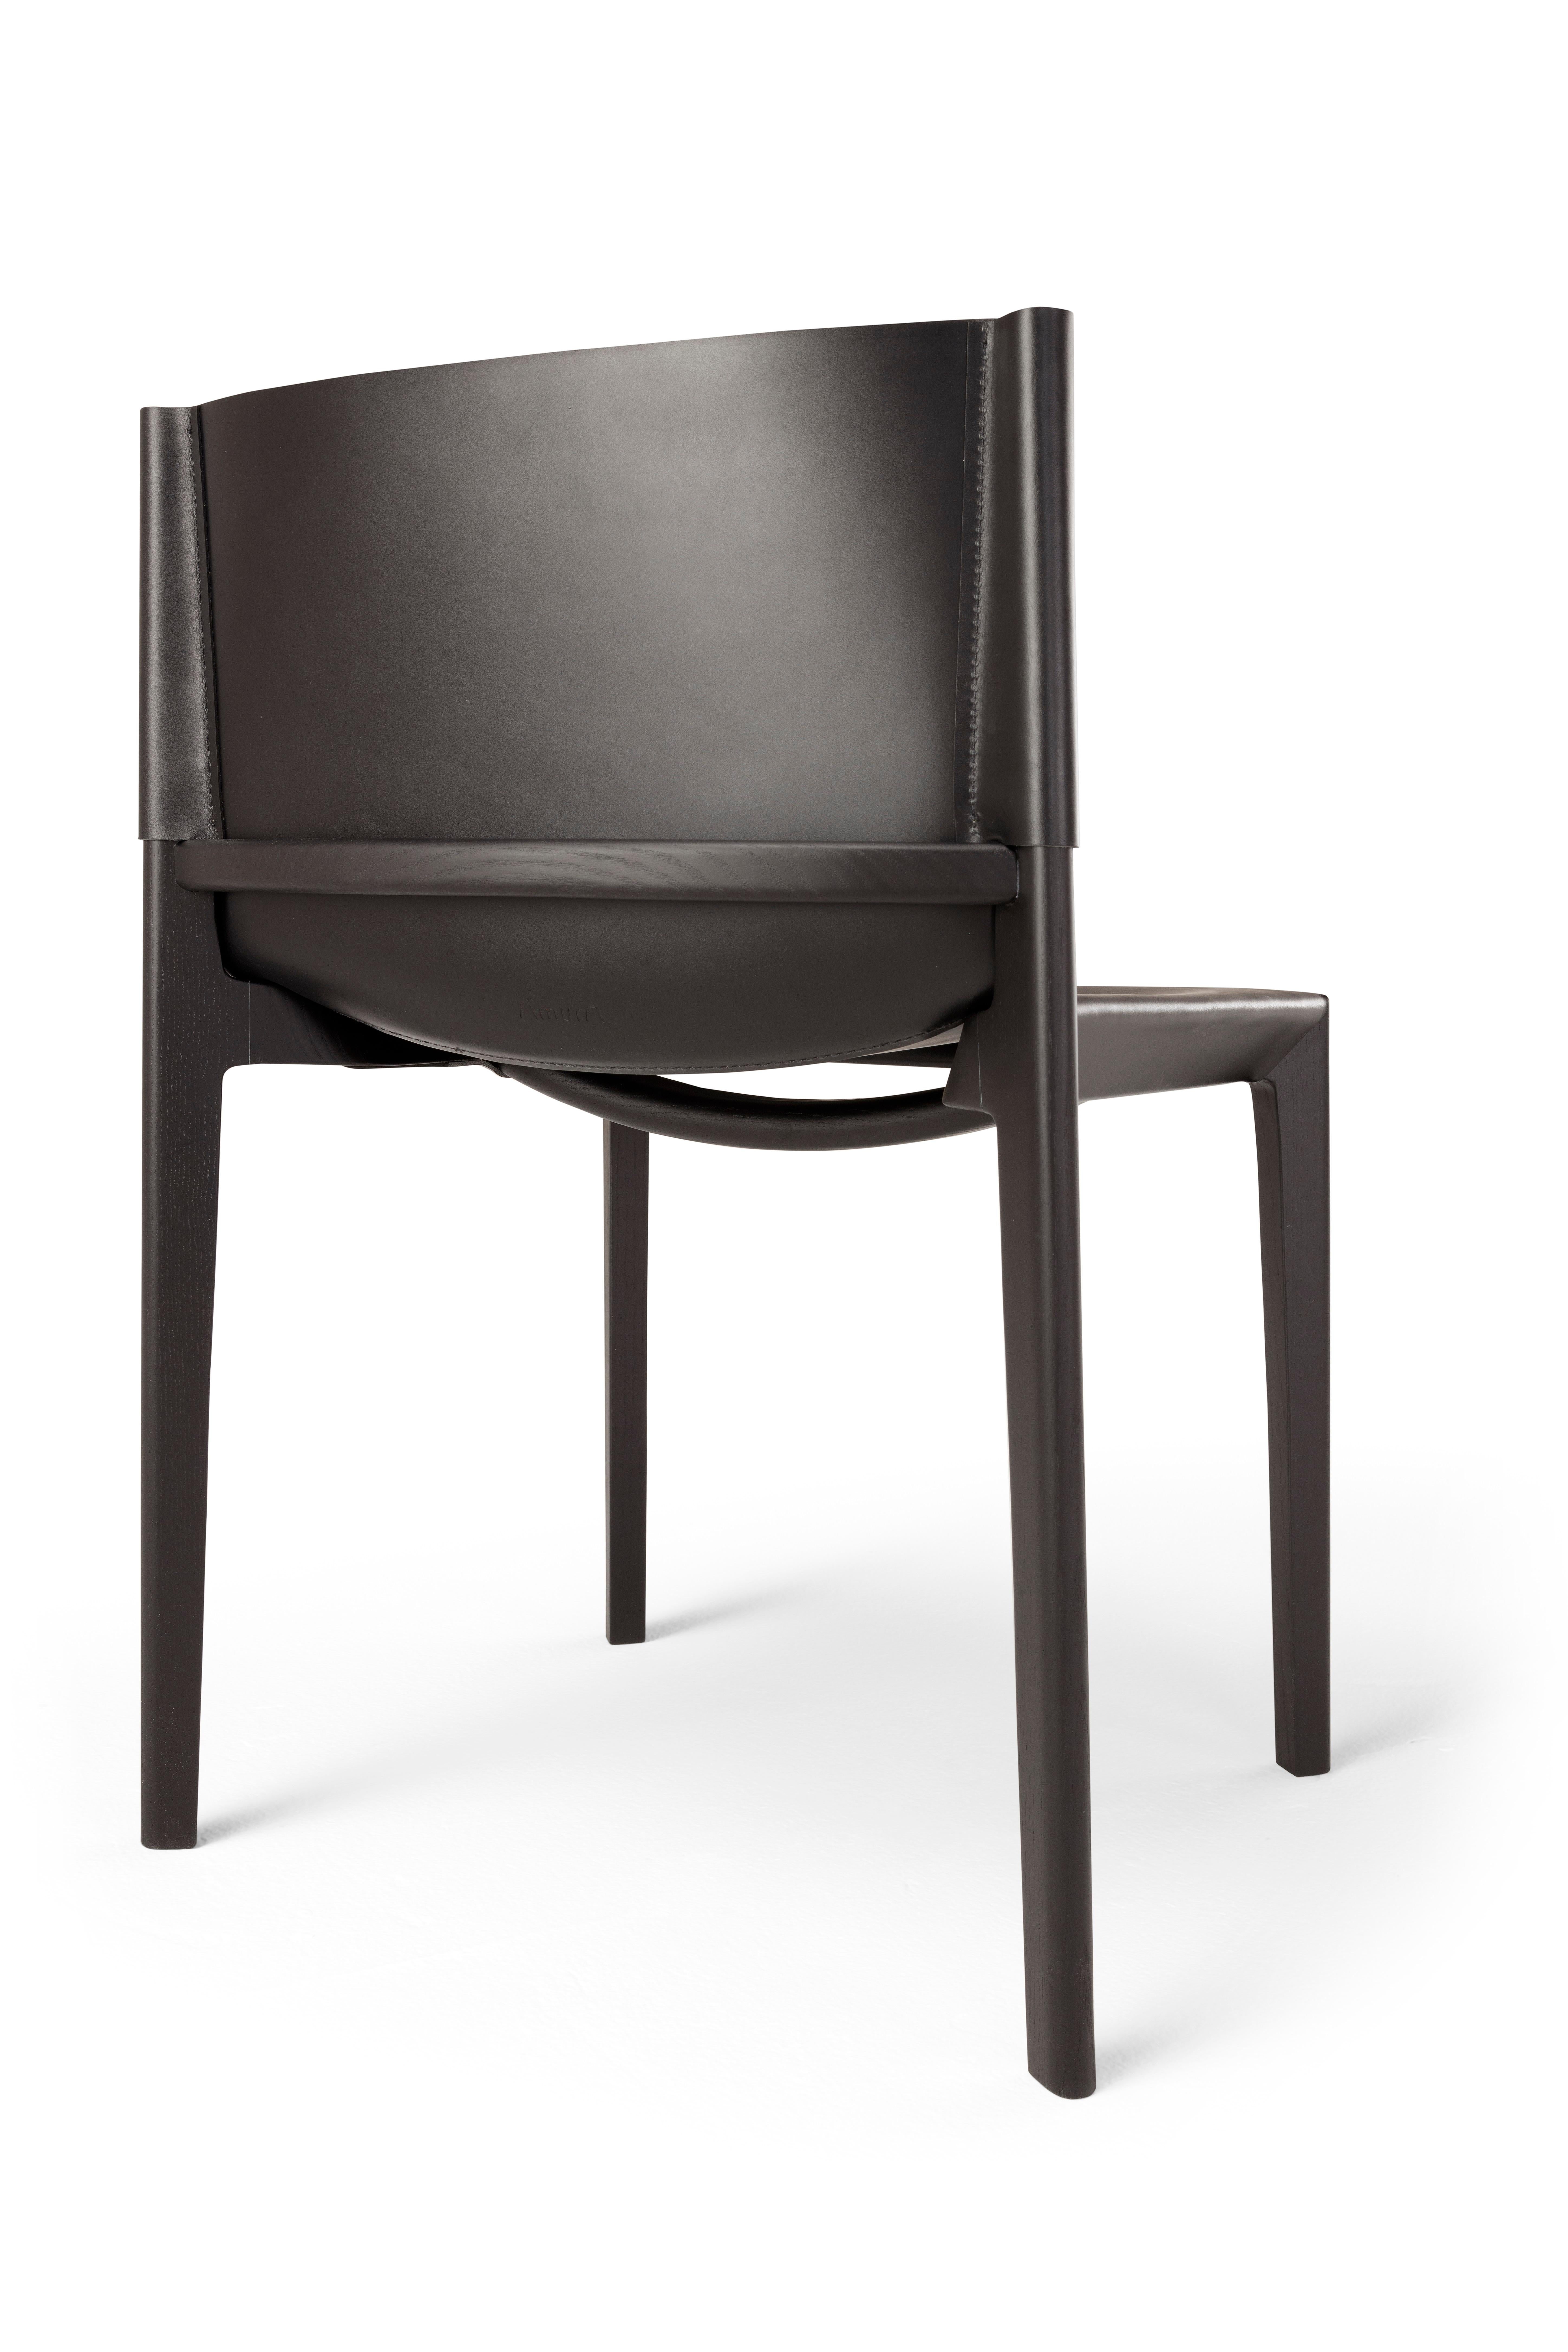 Contemporary Wooden Black Chair 'Stilt', Cuoio Leather For Sale 5